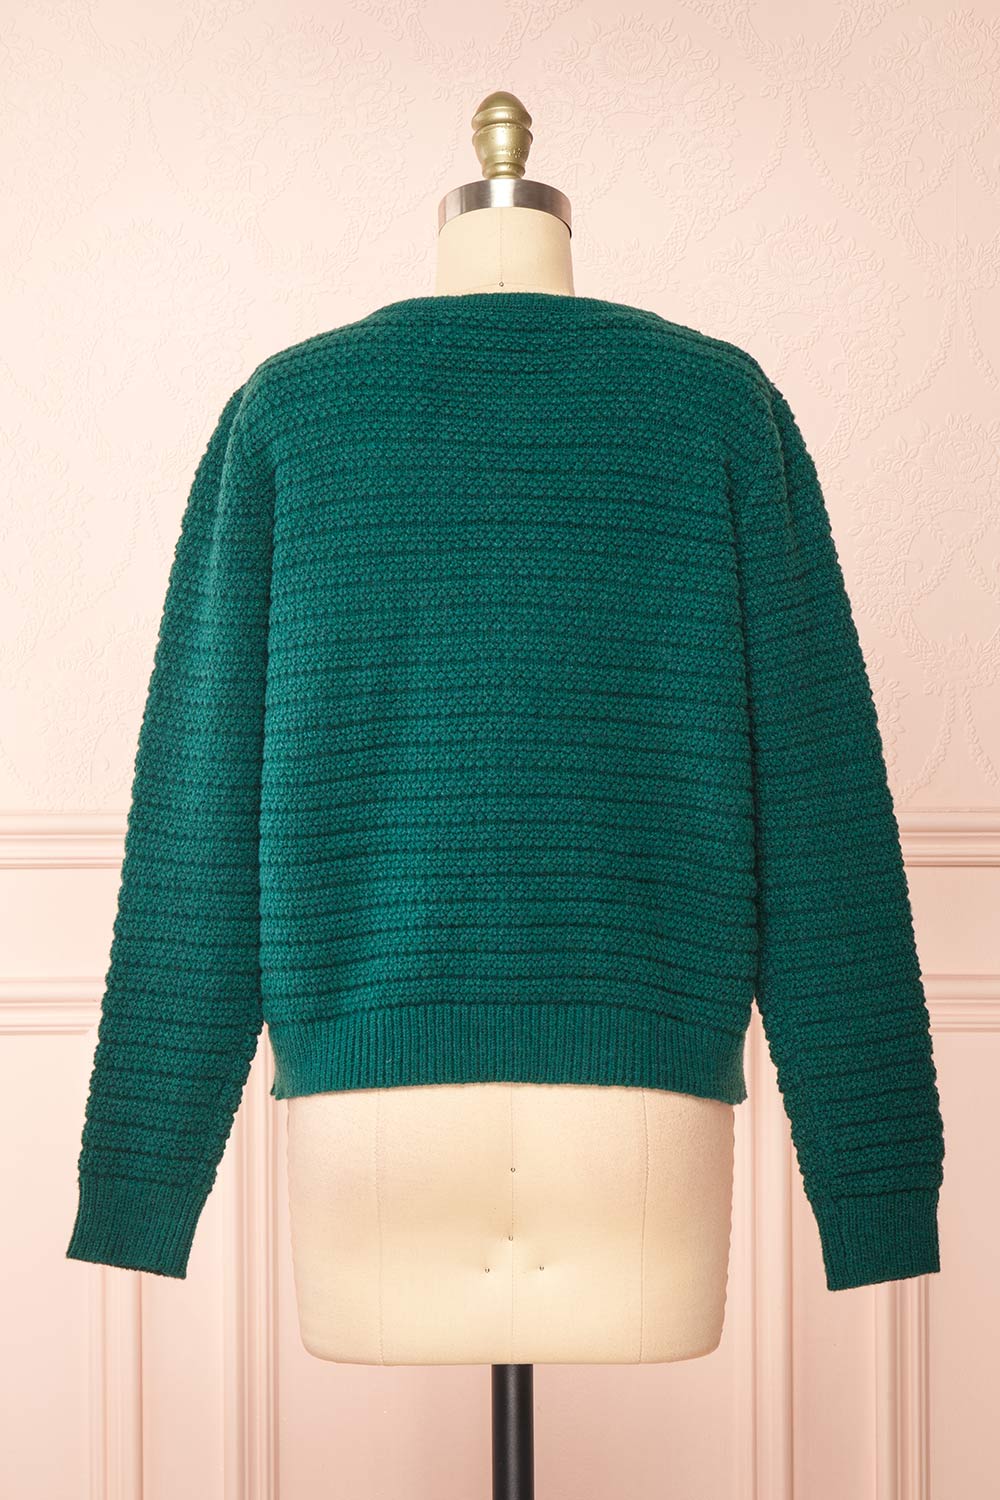 Suzie Green Oversized Knit Cardigan | Boutique 1861 back view